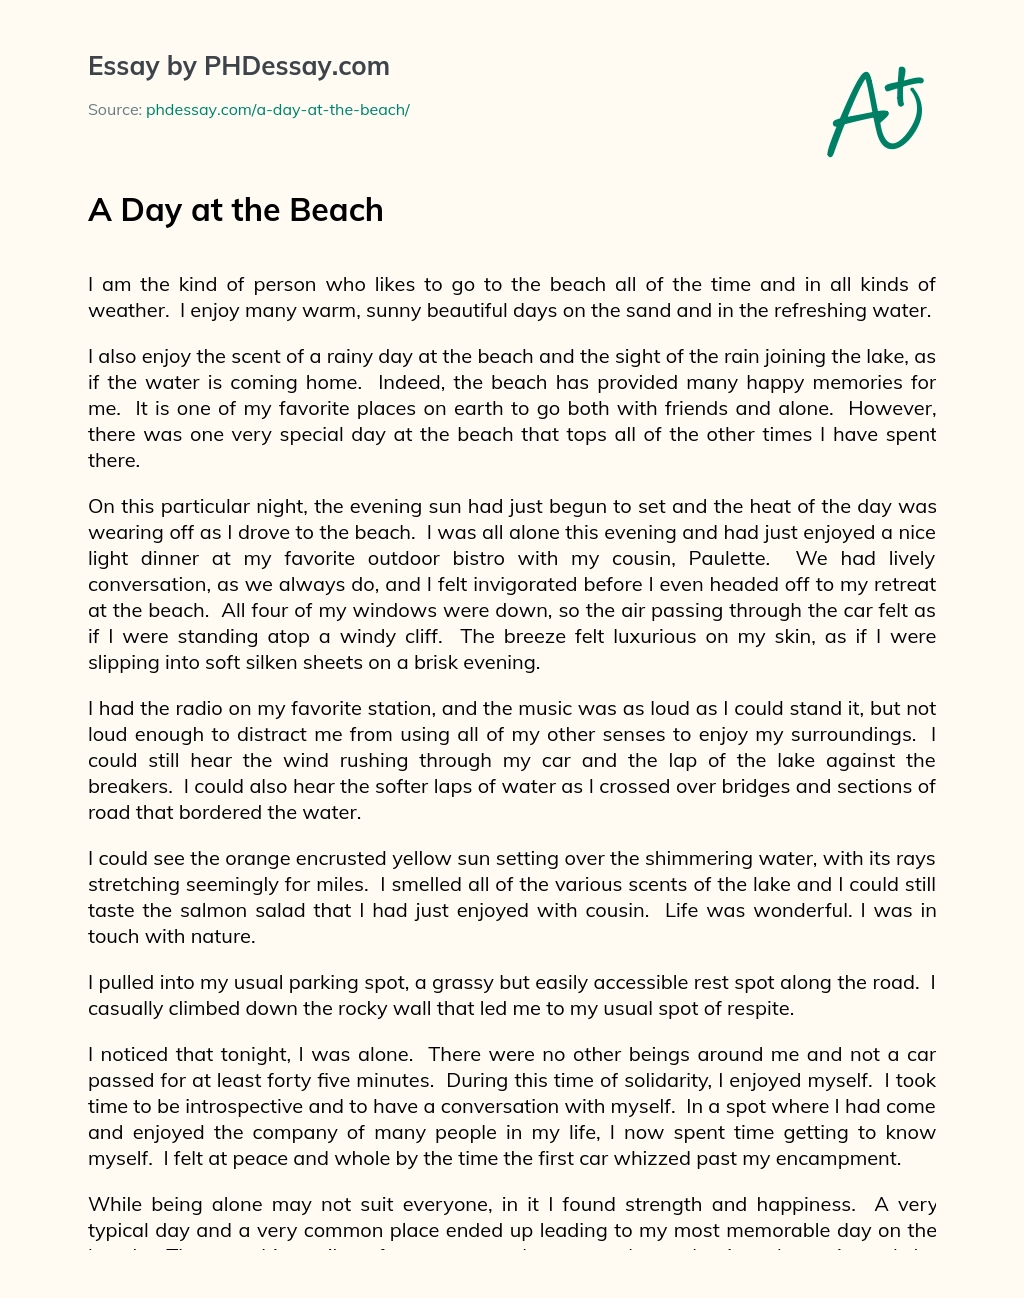 A Day at the Beach essay